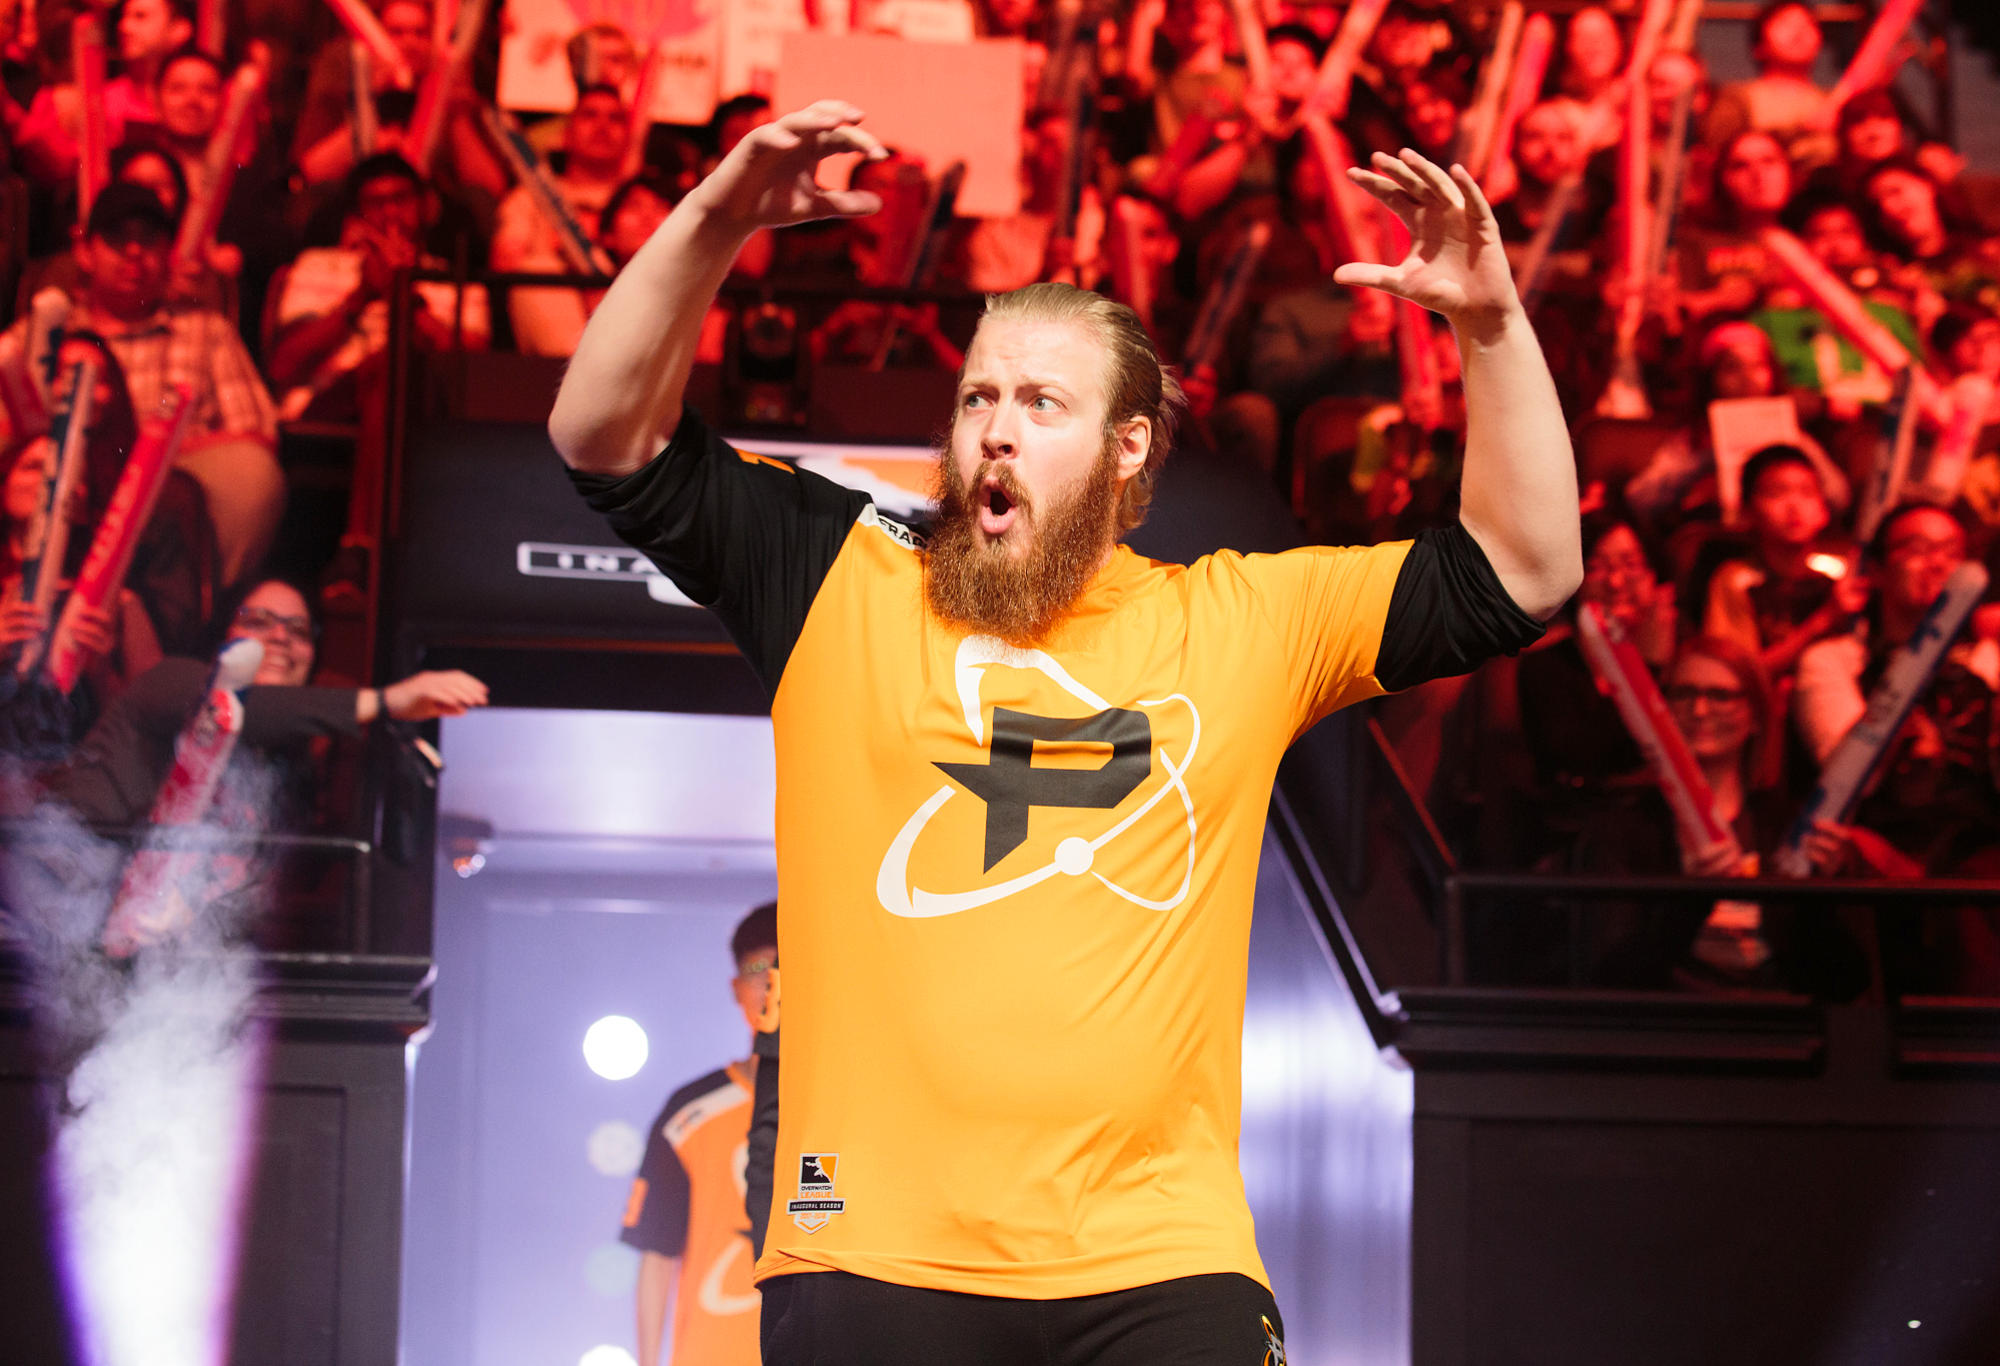 Joona "Fragi" Laine, of the Philadelphia Fusion esports team, pumps up the crowd before an Overwatch League game.